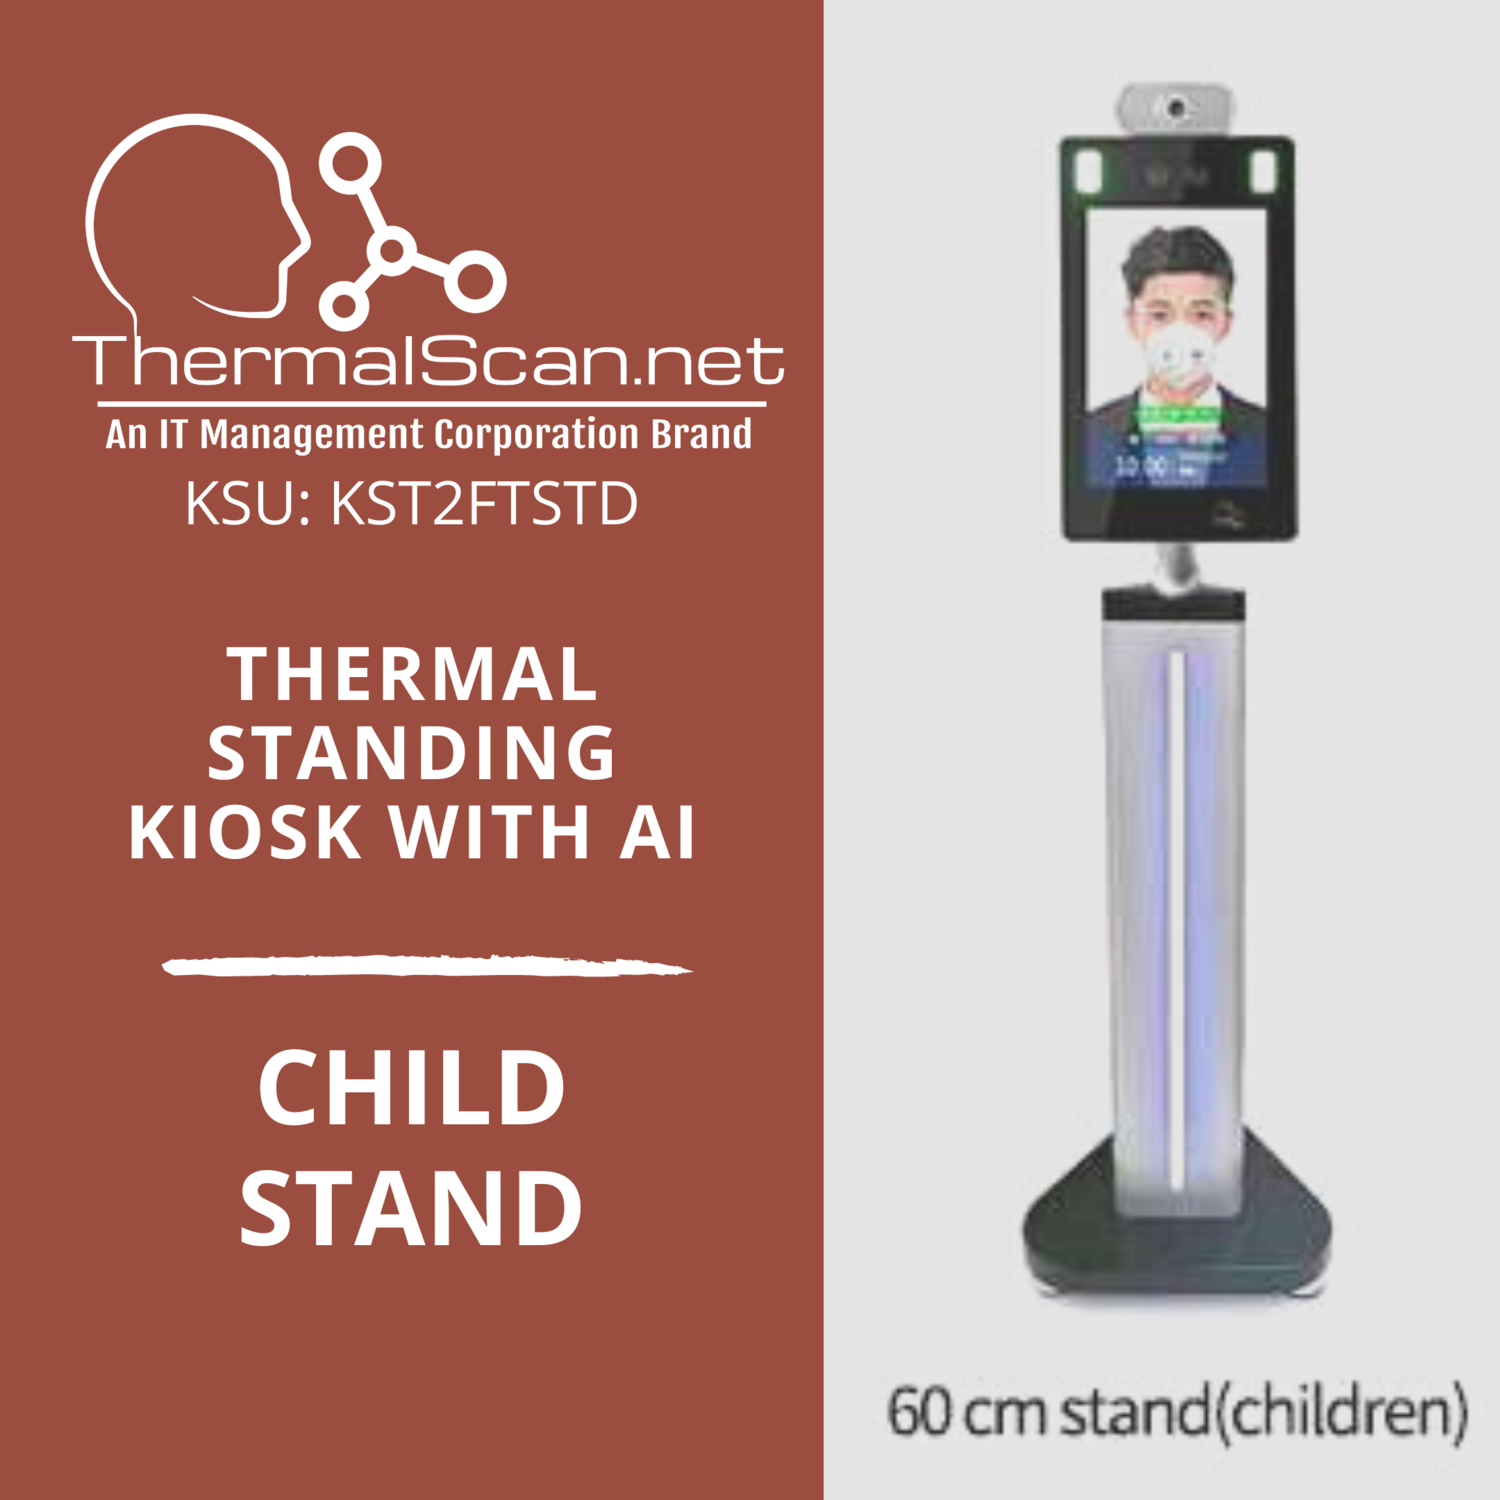 Child Stand for Temperature Scanning Kiosk